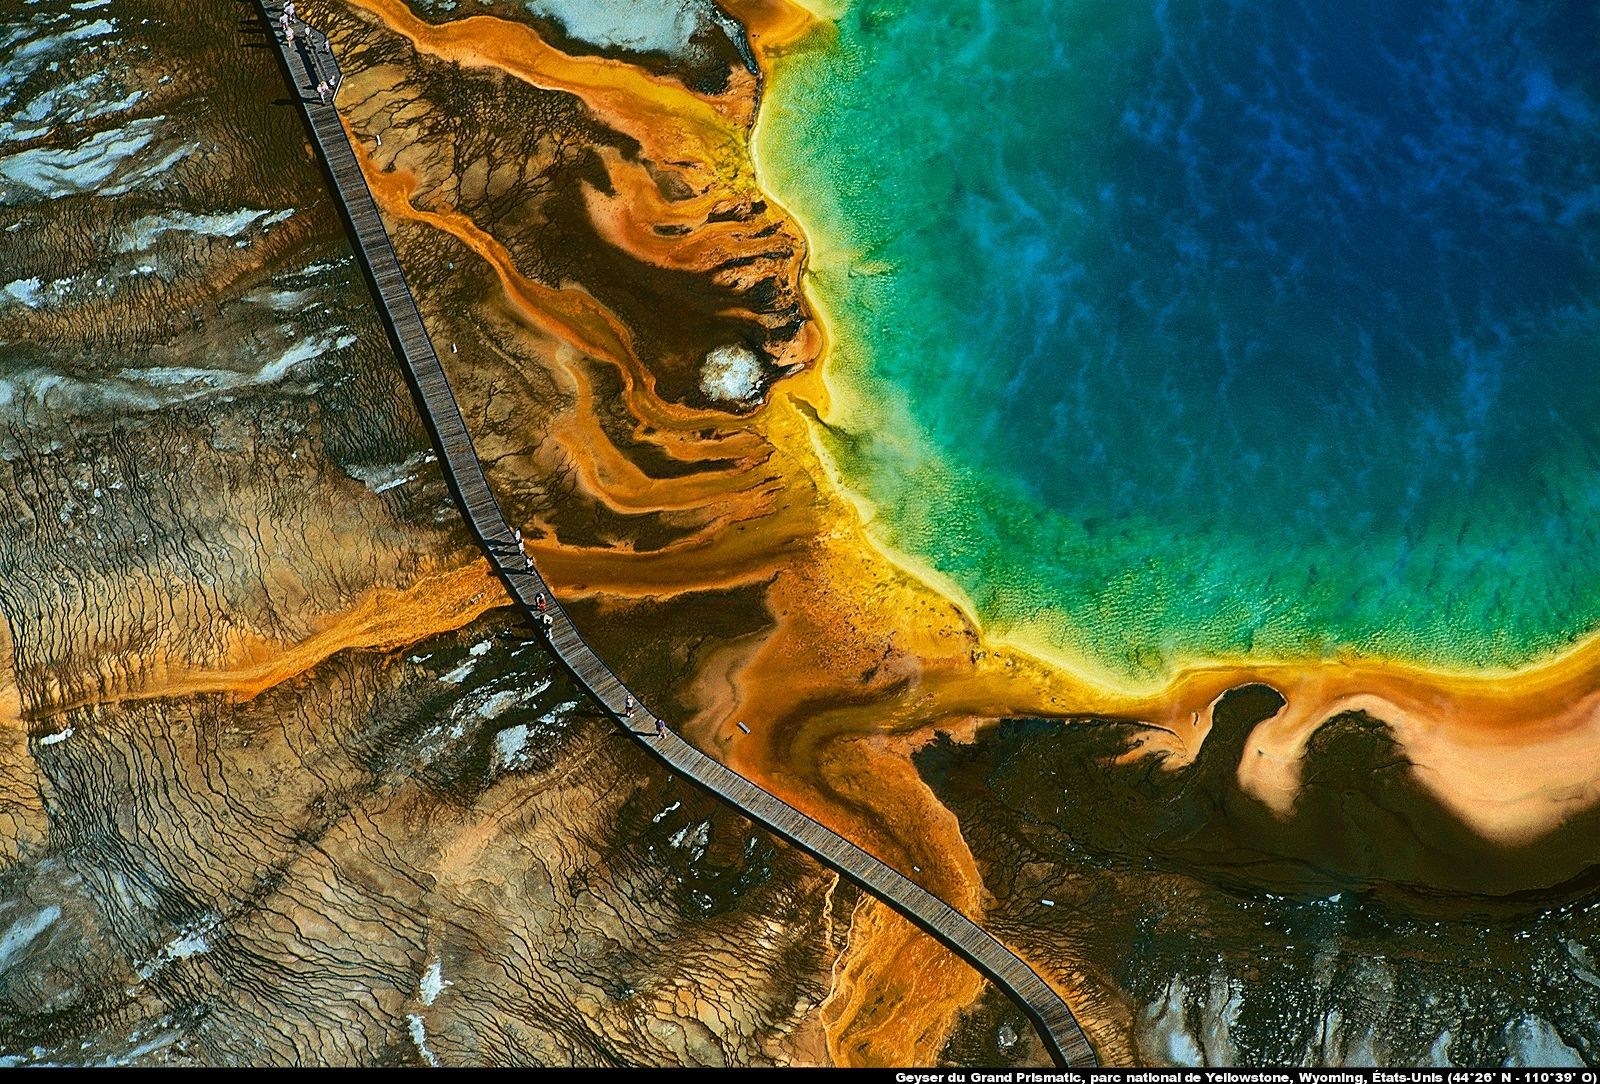 Astounding Aerials of Earth!!